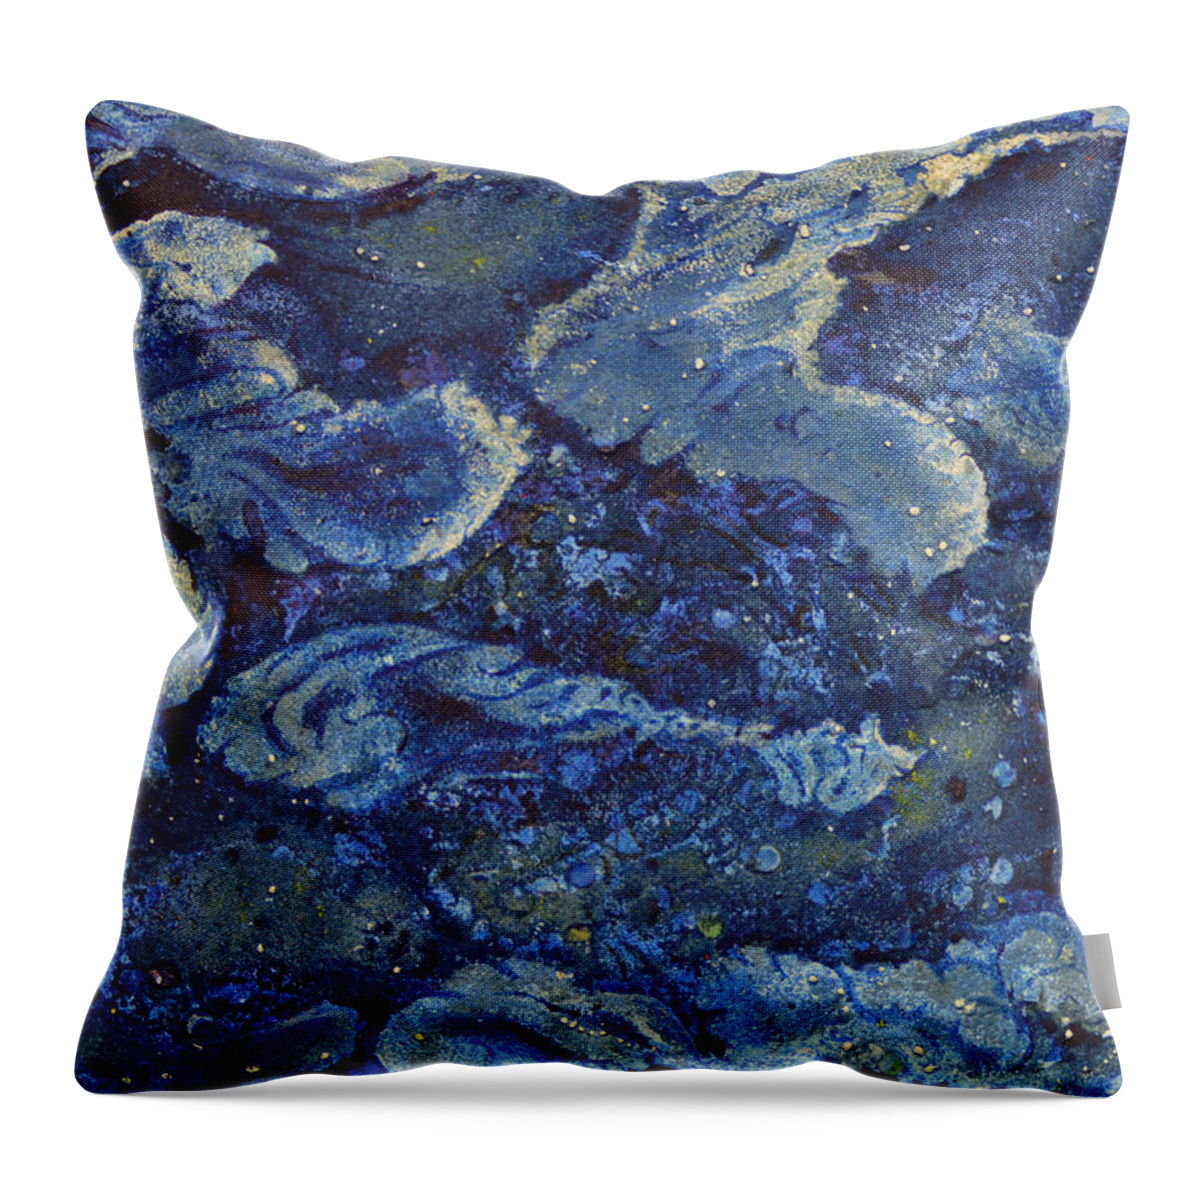  Throw Pillow featuring the painting Concentrated Ubiquity by Rod B Rainey